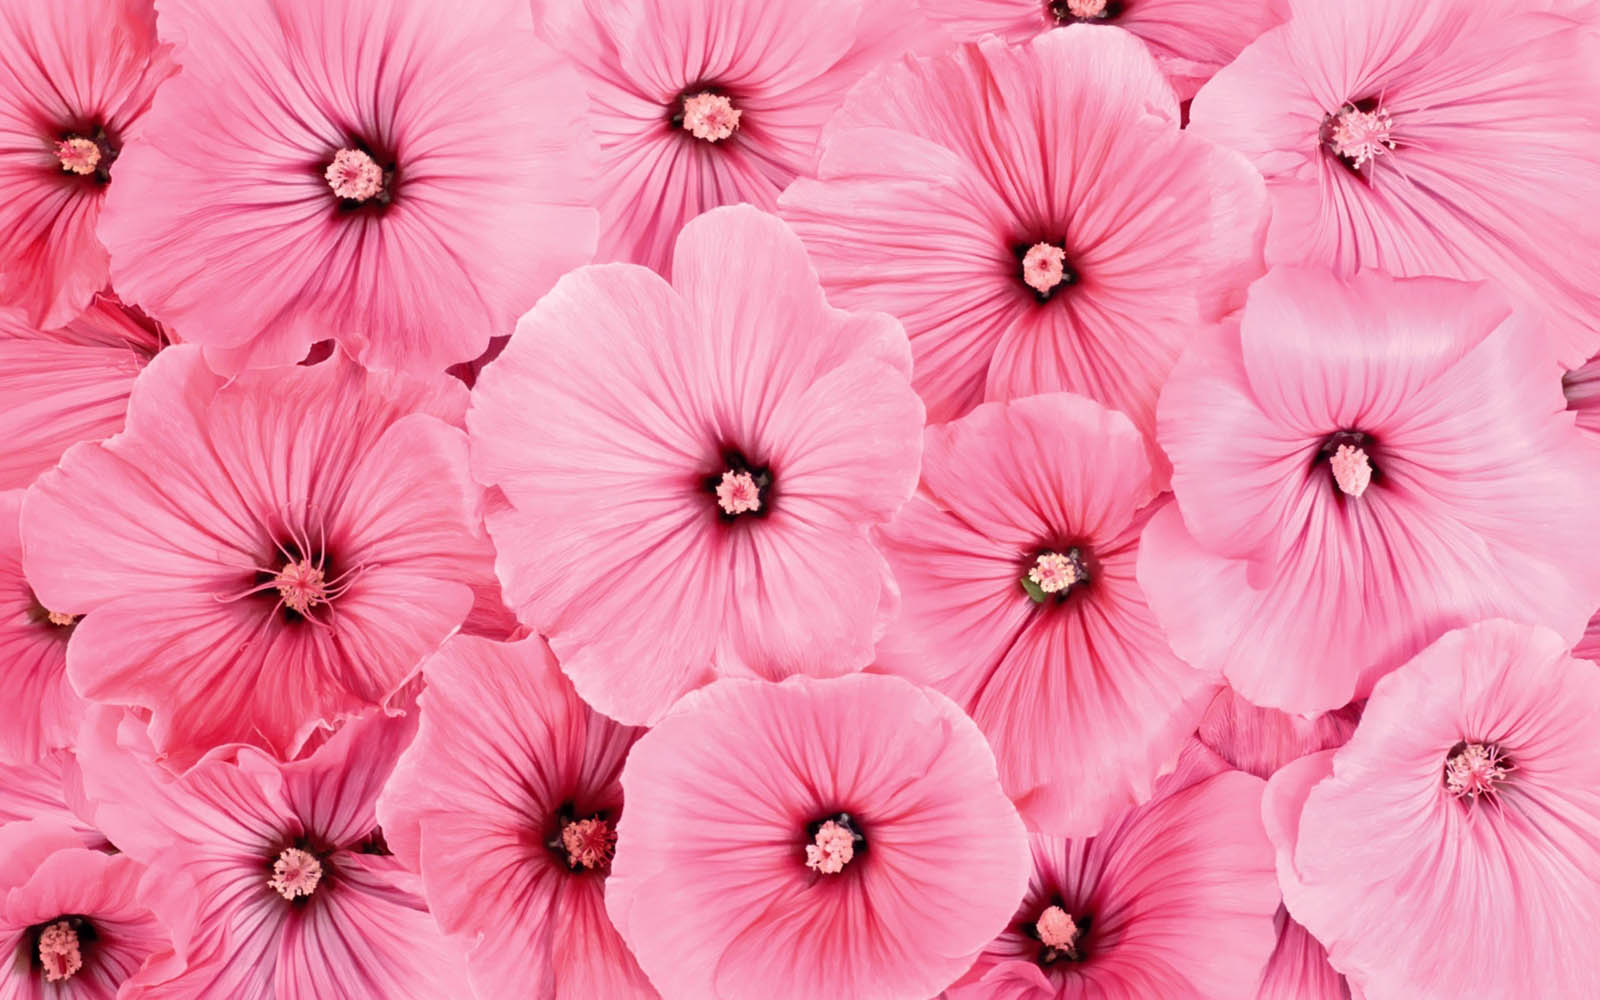  Wallpapers Pink Flowers Desktop Backgrounds Pink Flowers PhotosPink